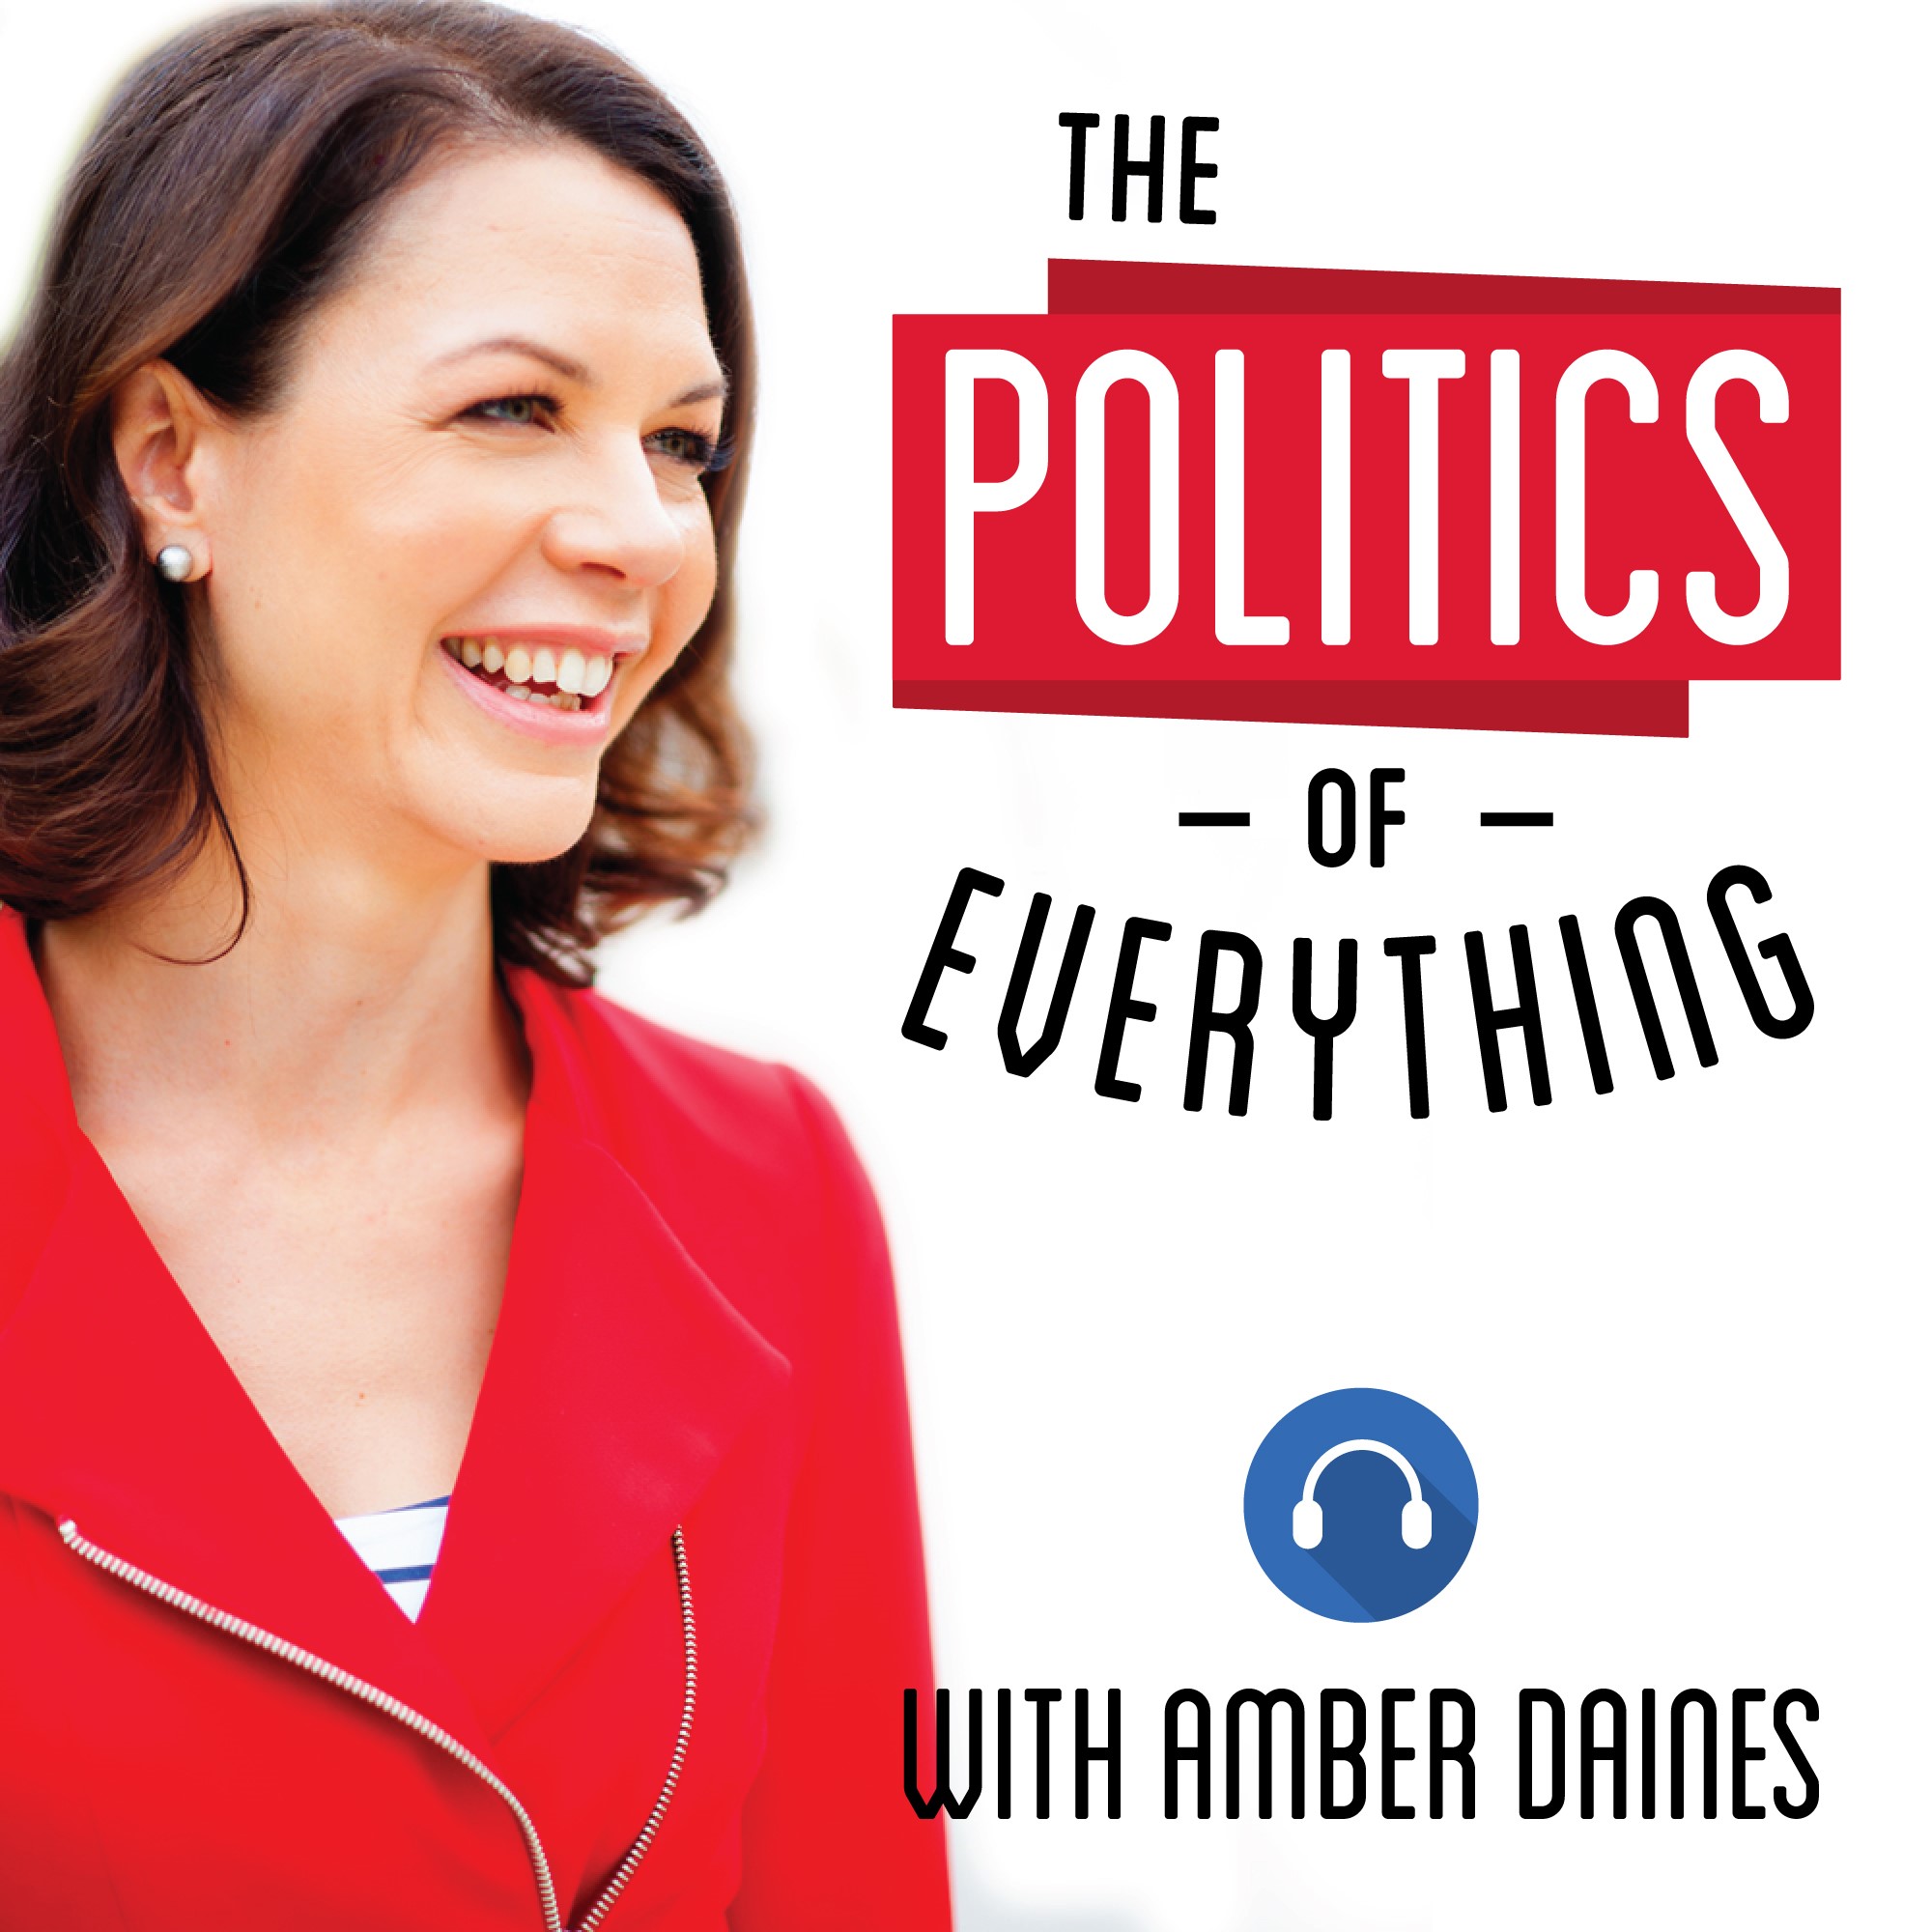 The Politics of Everything